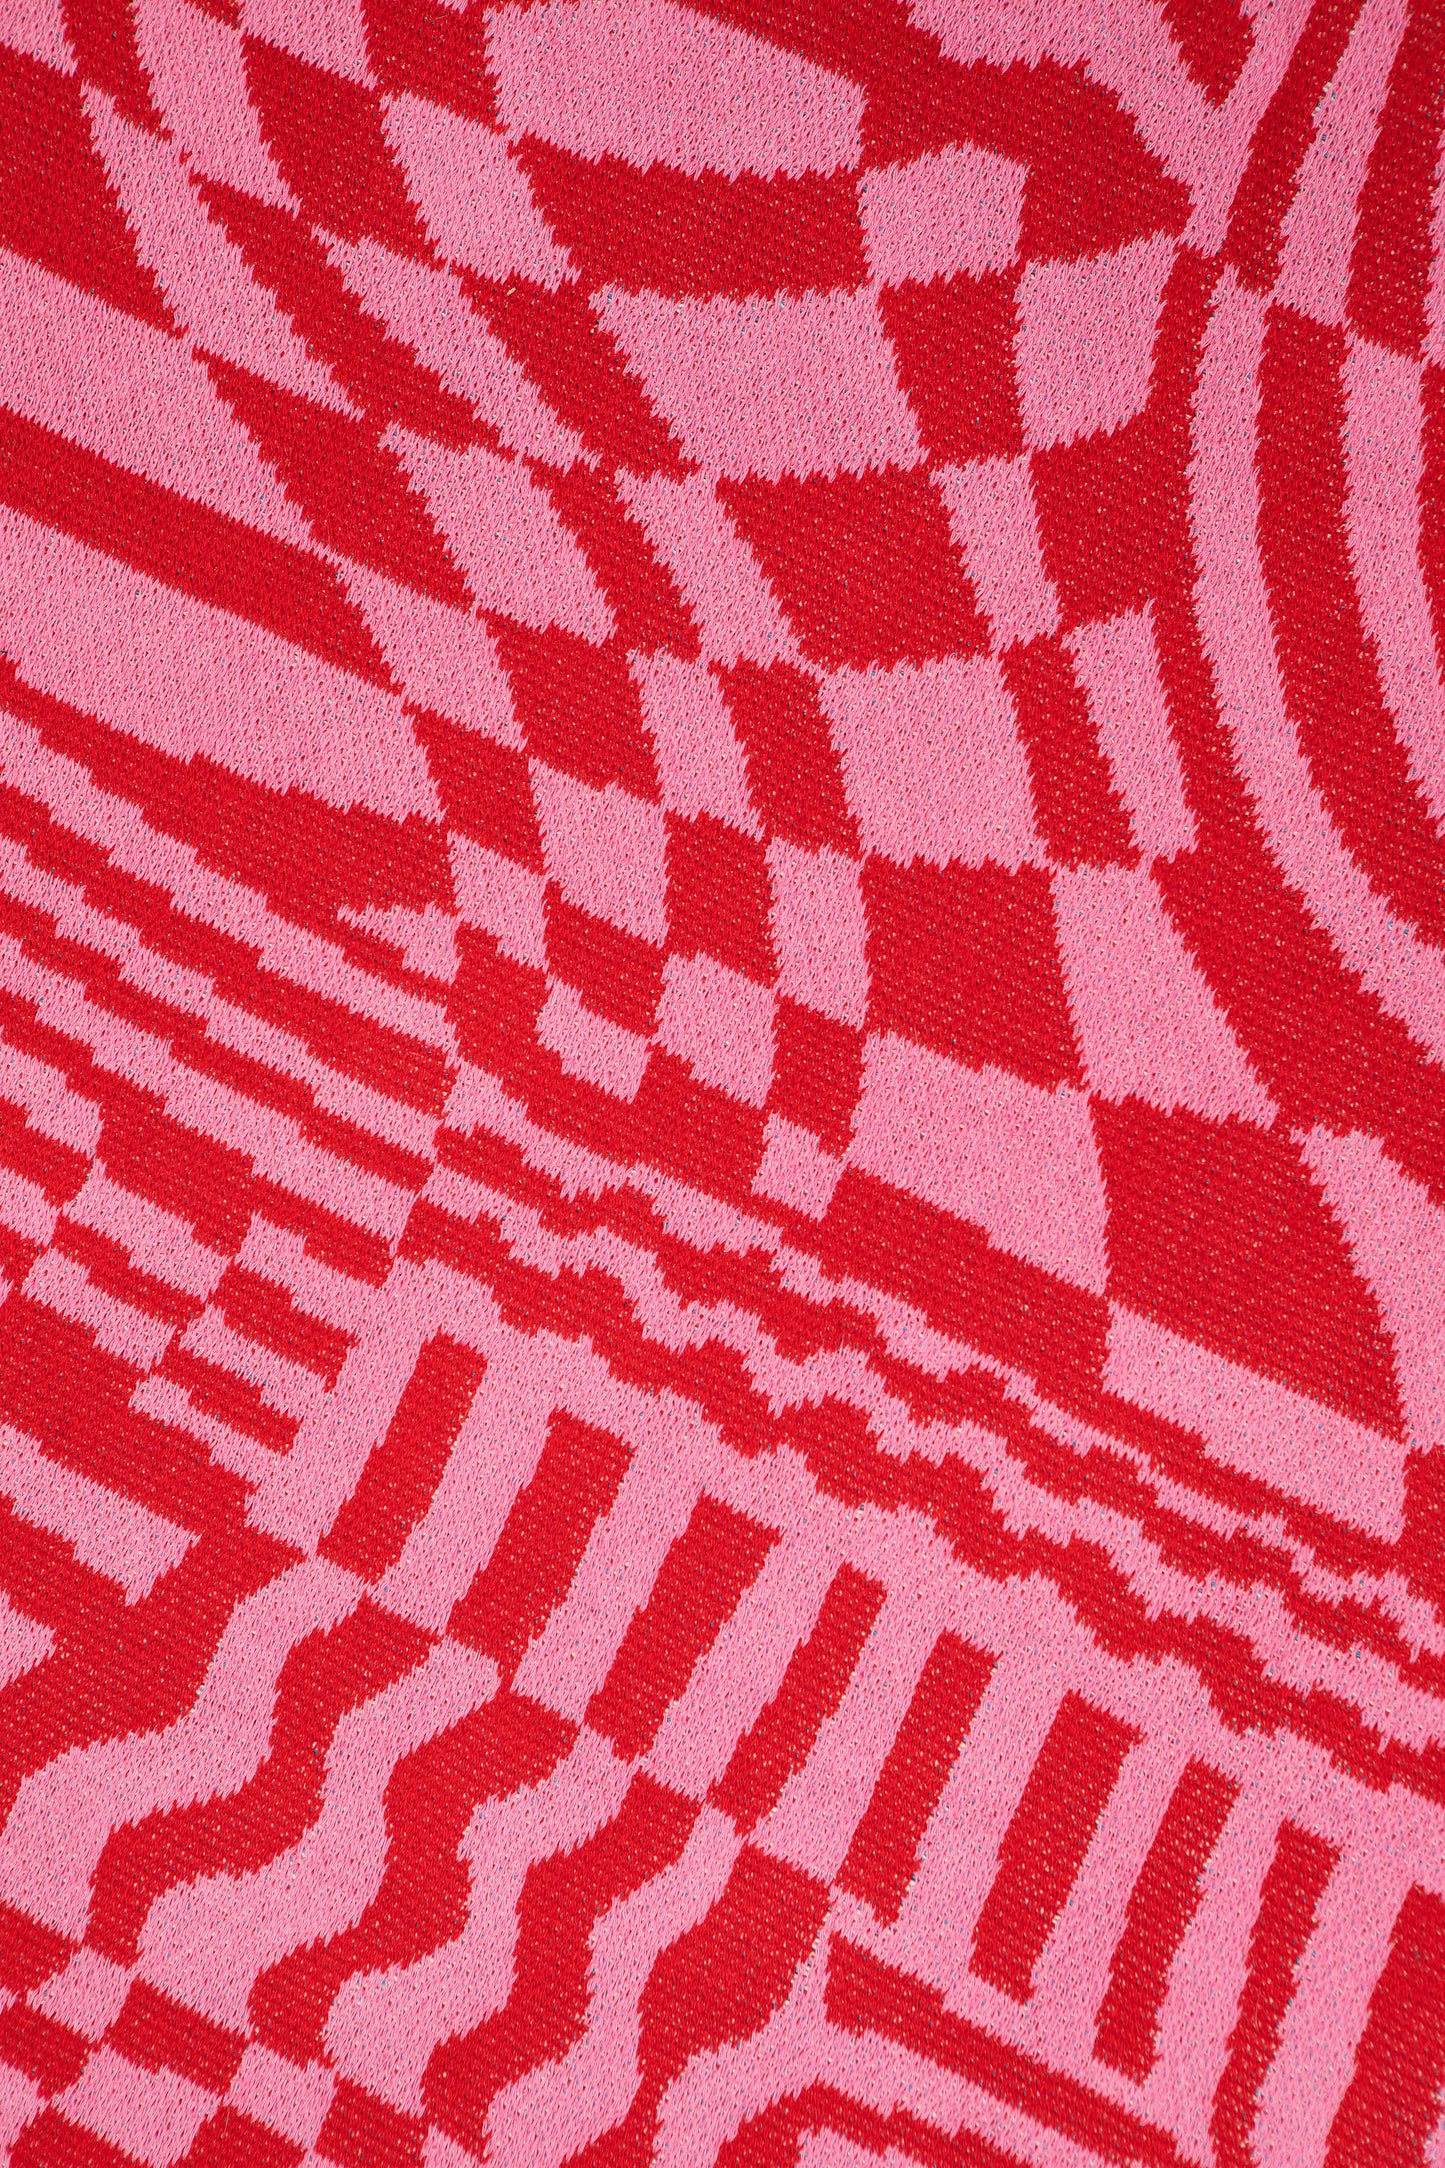 Close up of Wiggles and Waves showing the red and pink abstract designs and knit pattern.